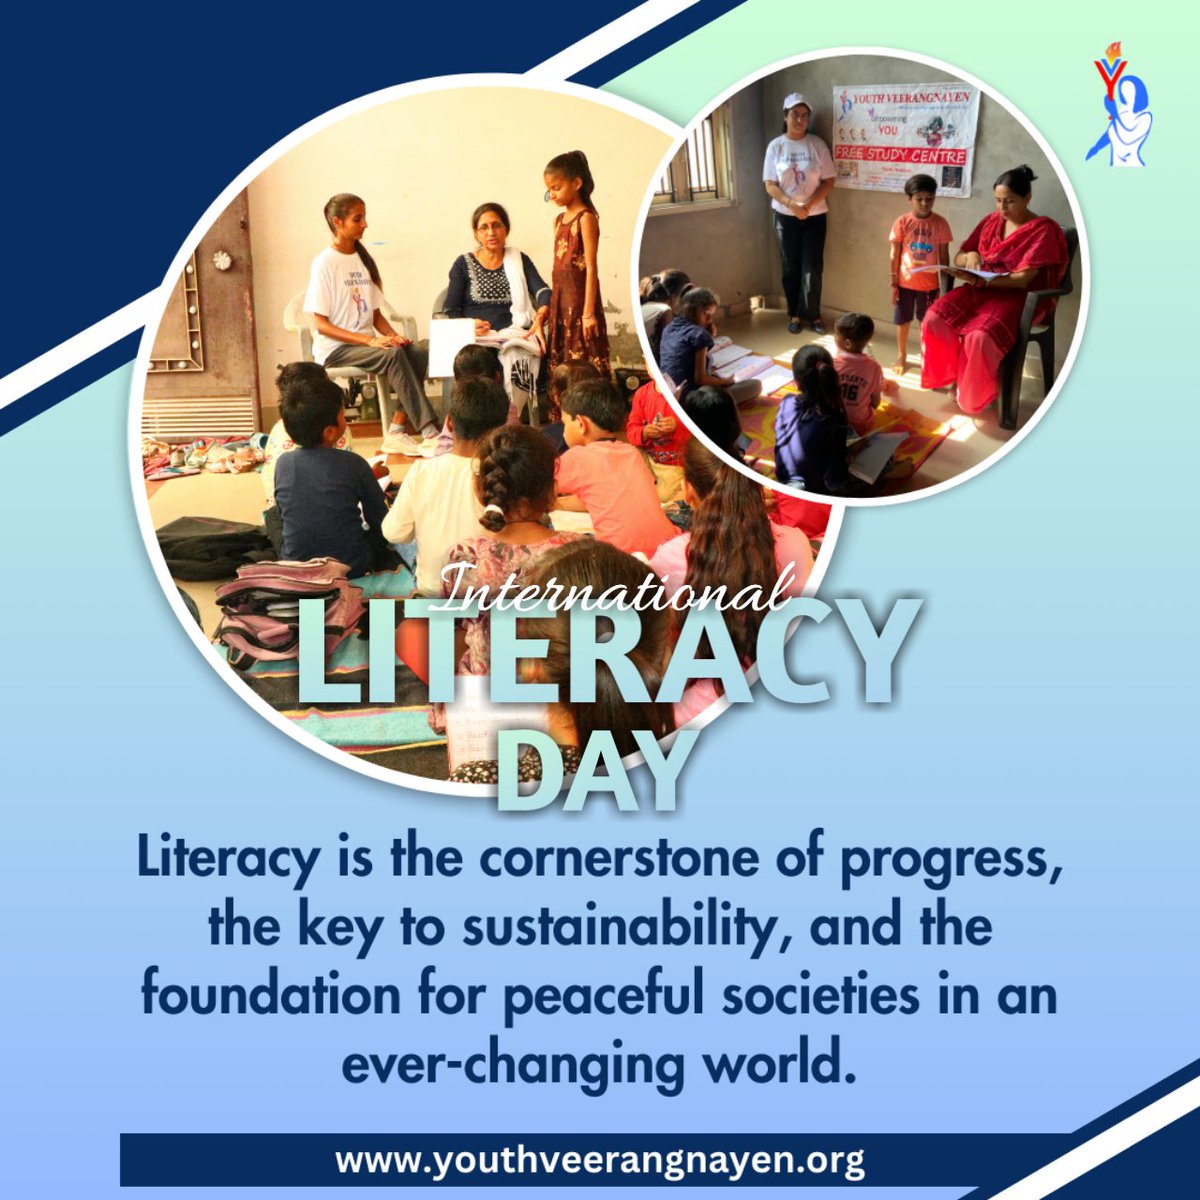 This Literacy Day, let's step up and promote literacy to create a more sustainable for us and the generations to come! 

#EducationForAll #LiteracyDay
#EducateEveryChild
#InternationalLiteracyDay
#WorldLiteracyDay
#InternationalLiteracyDay2023